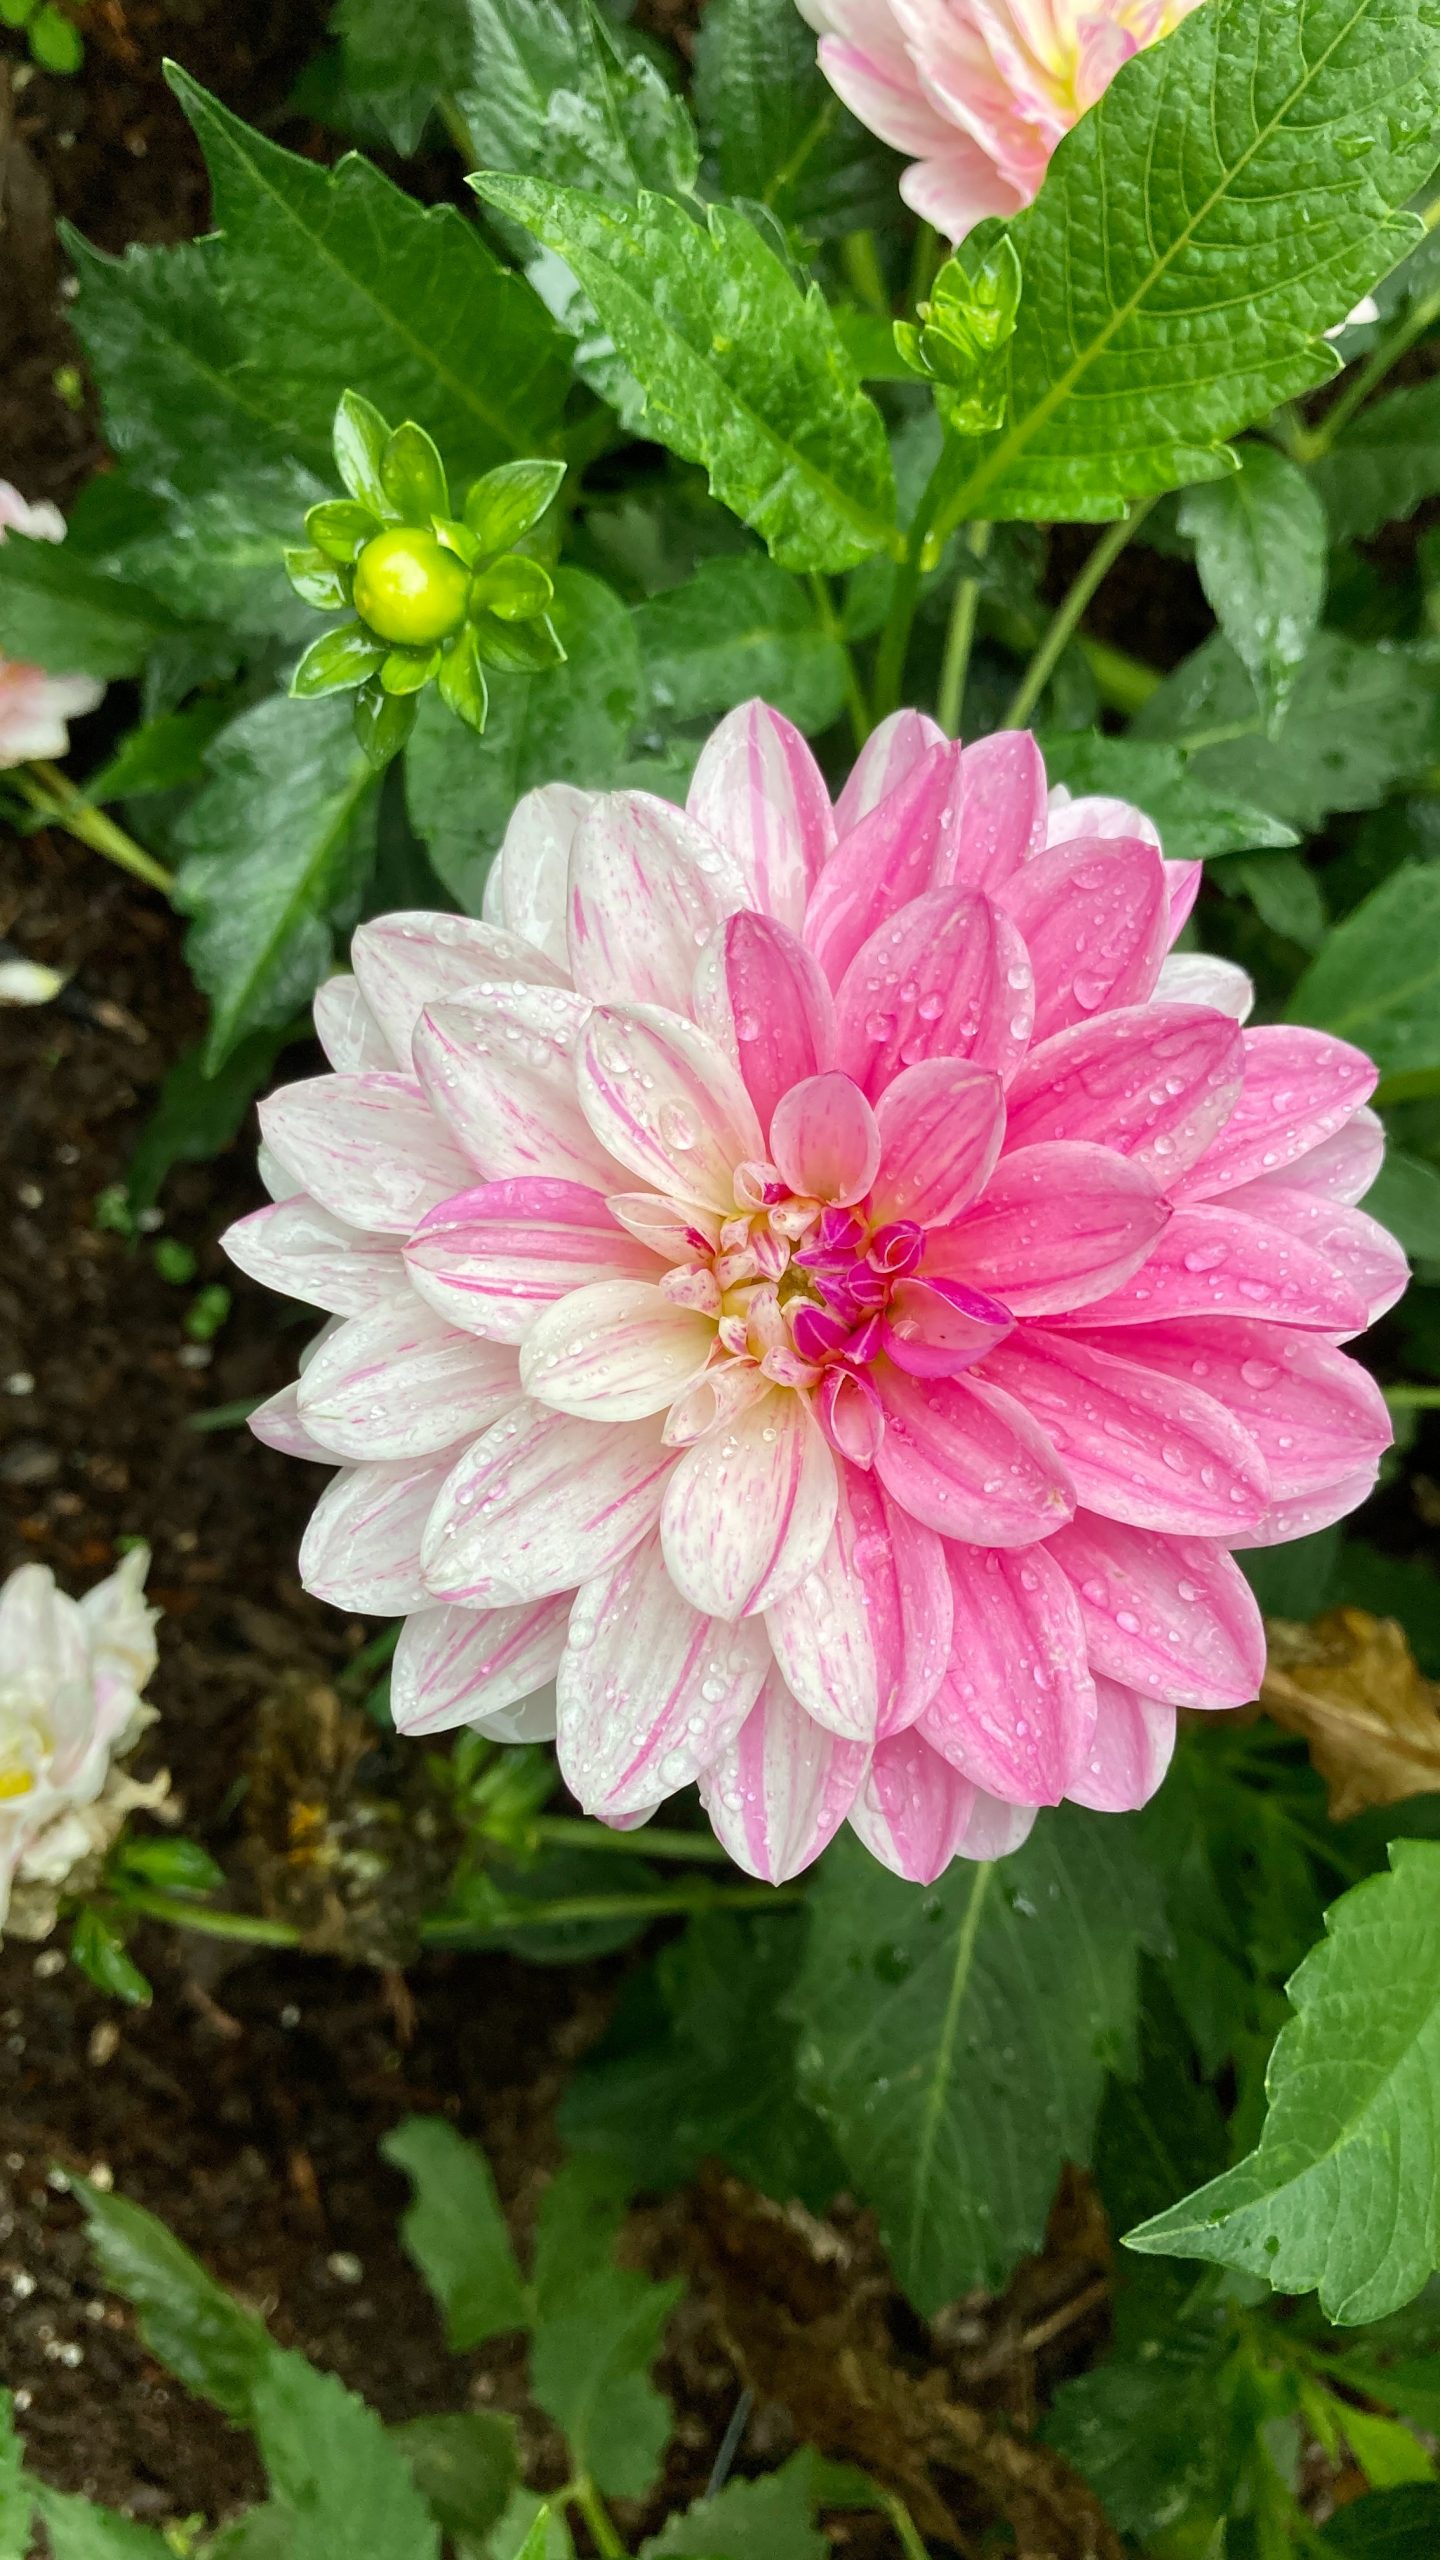 How To Tell If Dahlia Tubers Are Dead?